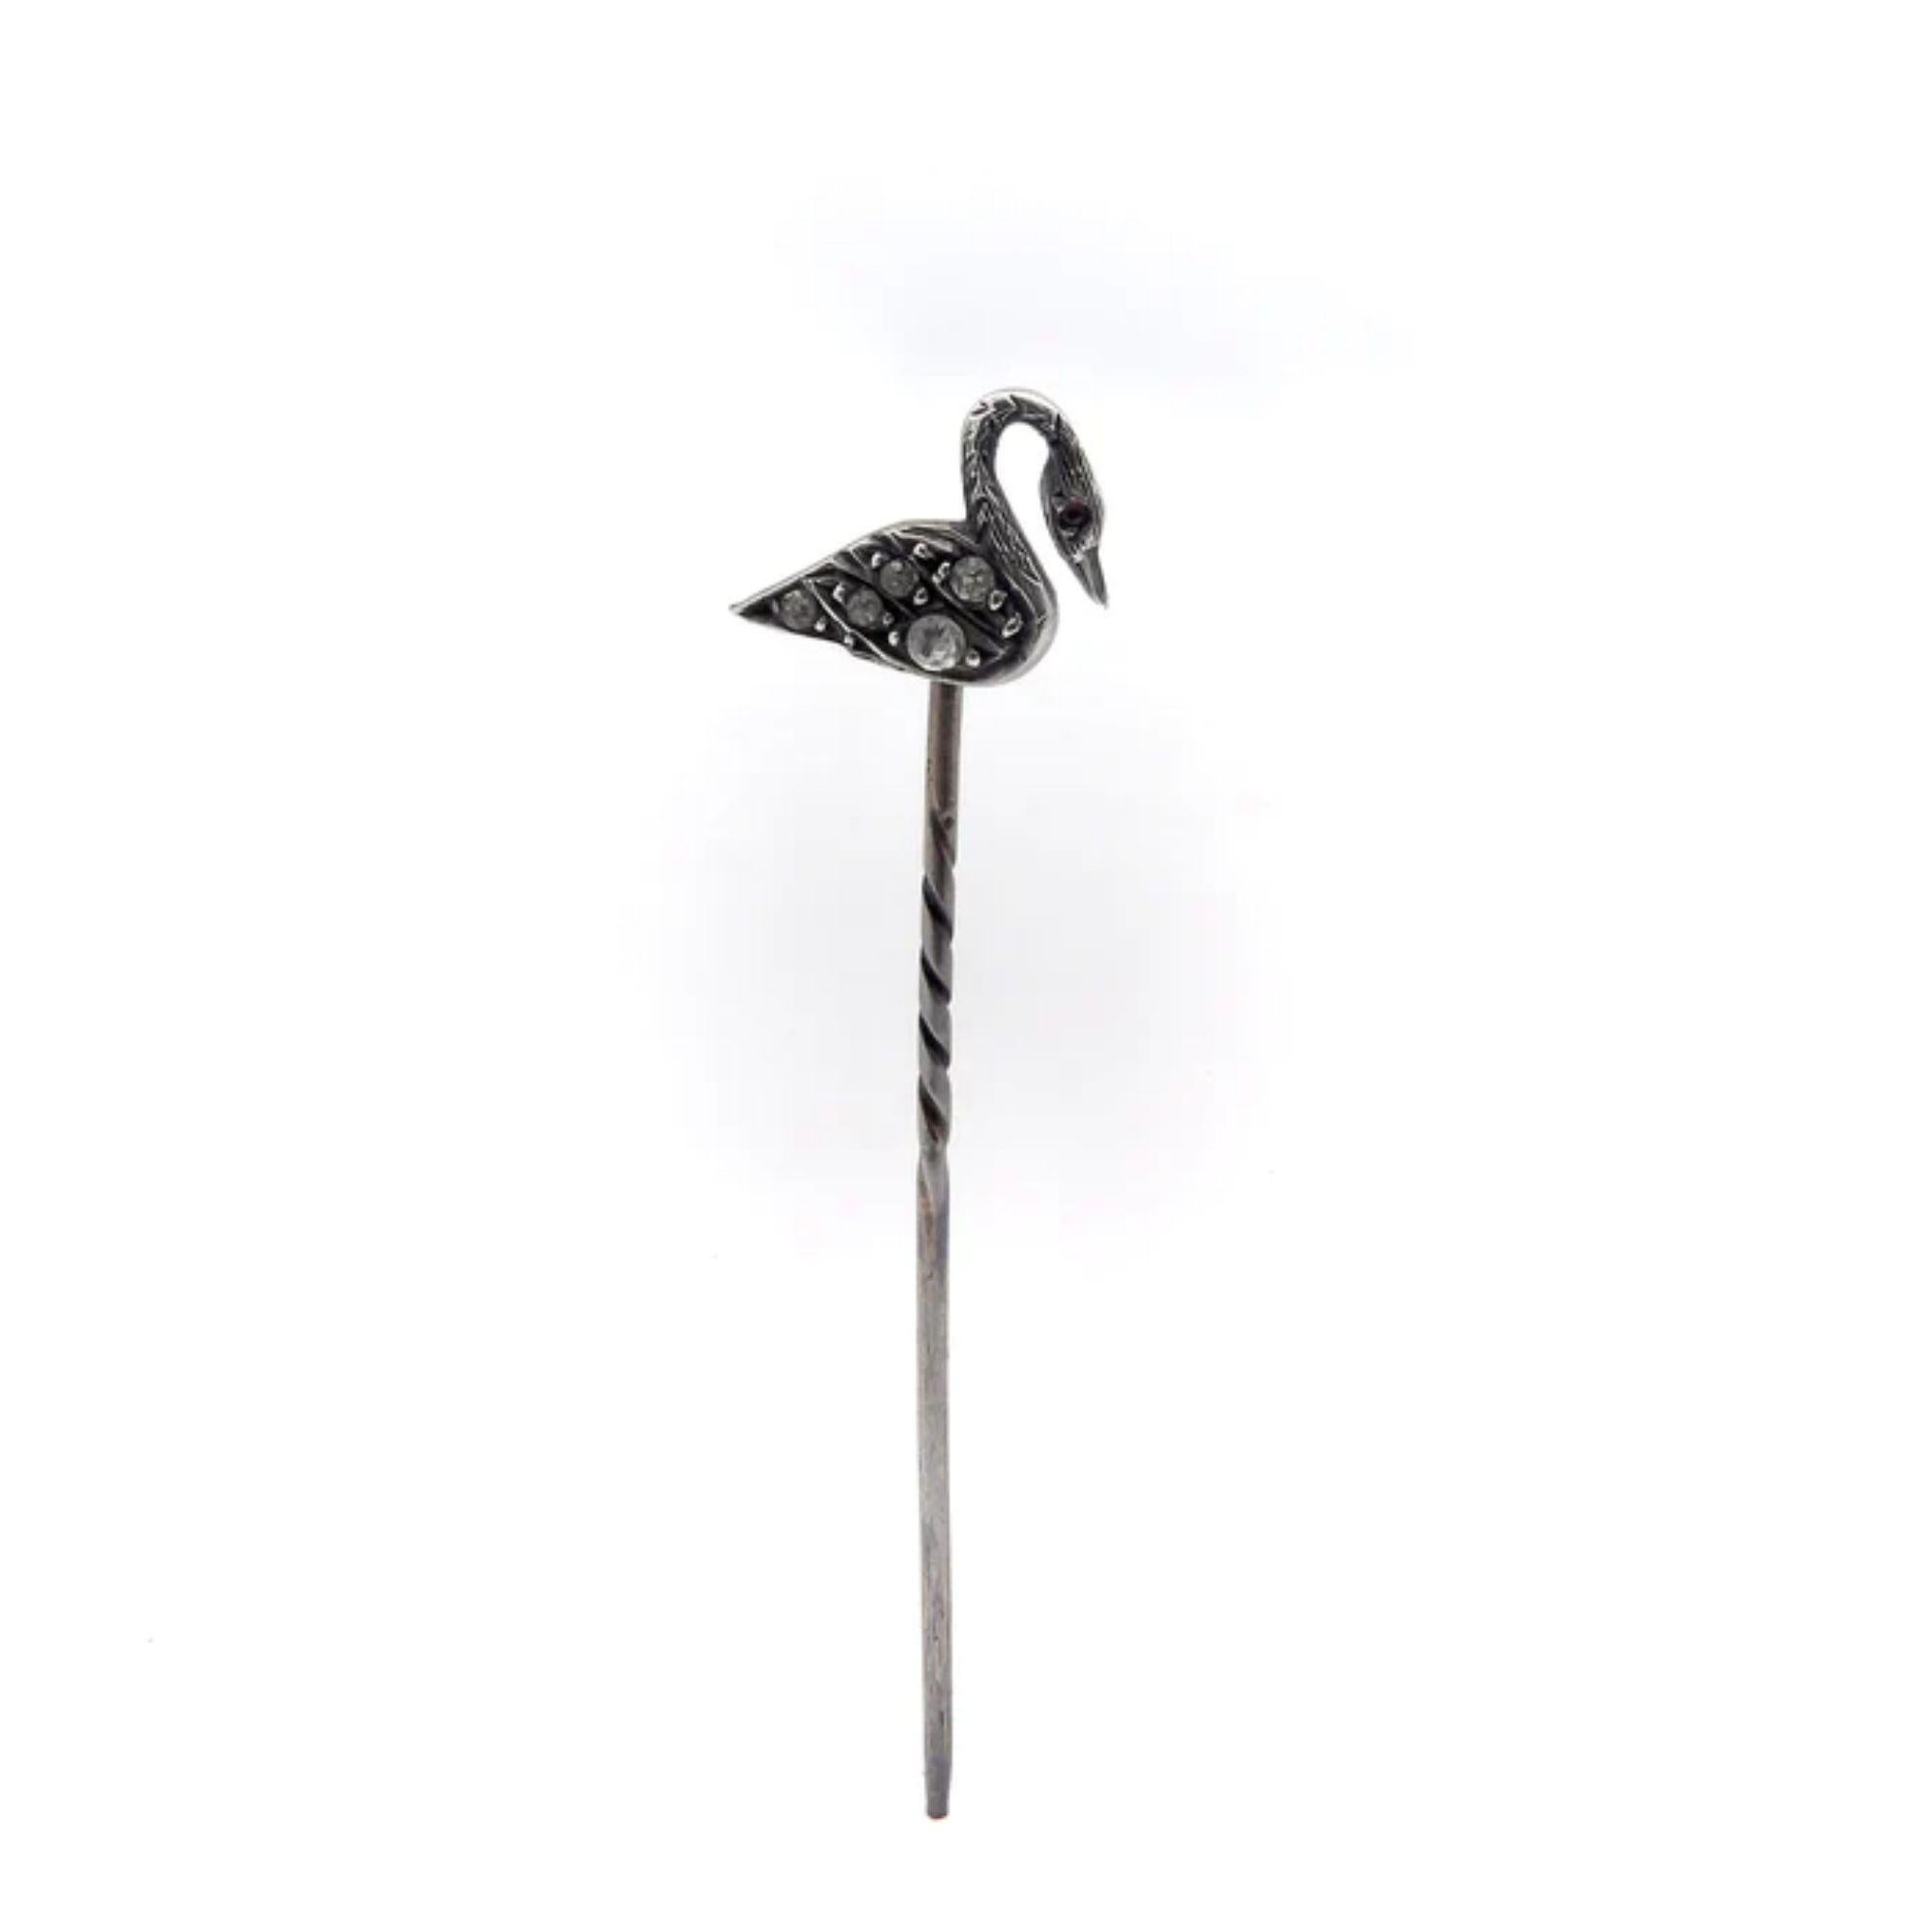 The swan on this Victorian-era stickpin is adorned with five hand-cut high table paste stones in its wings and a ruby cabochon for its eye. The sterling silver is well-oxidized making for a beautiful patina that offsets the paste stones and creates